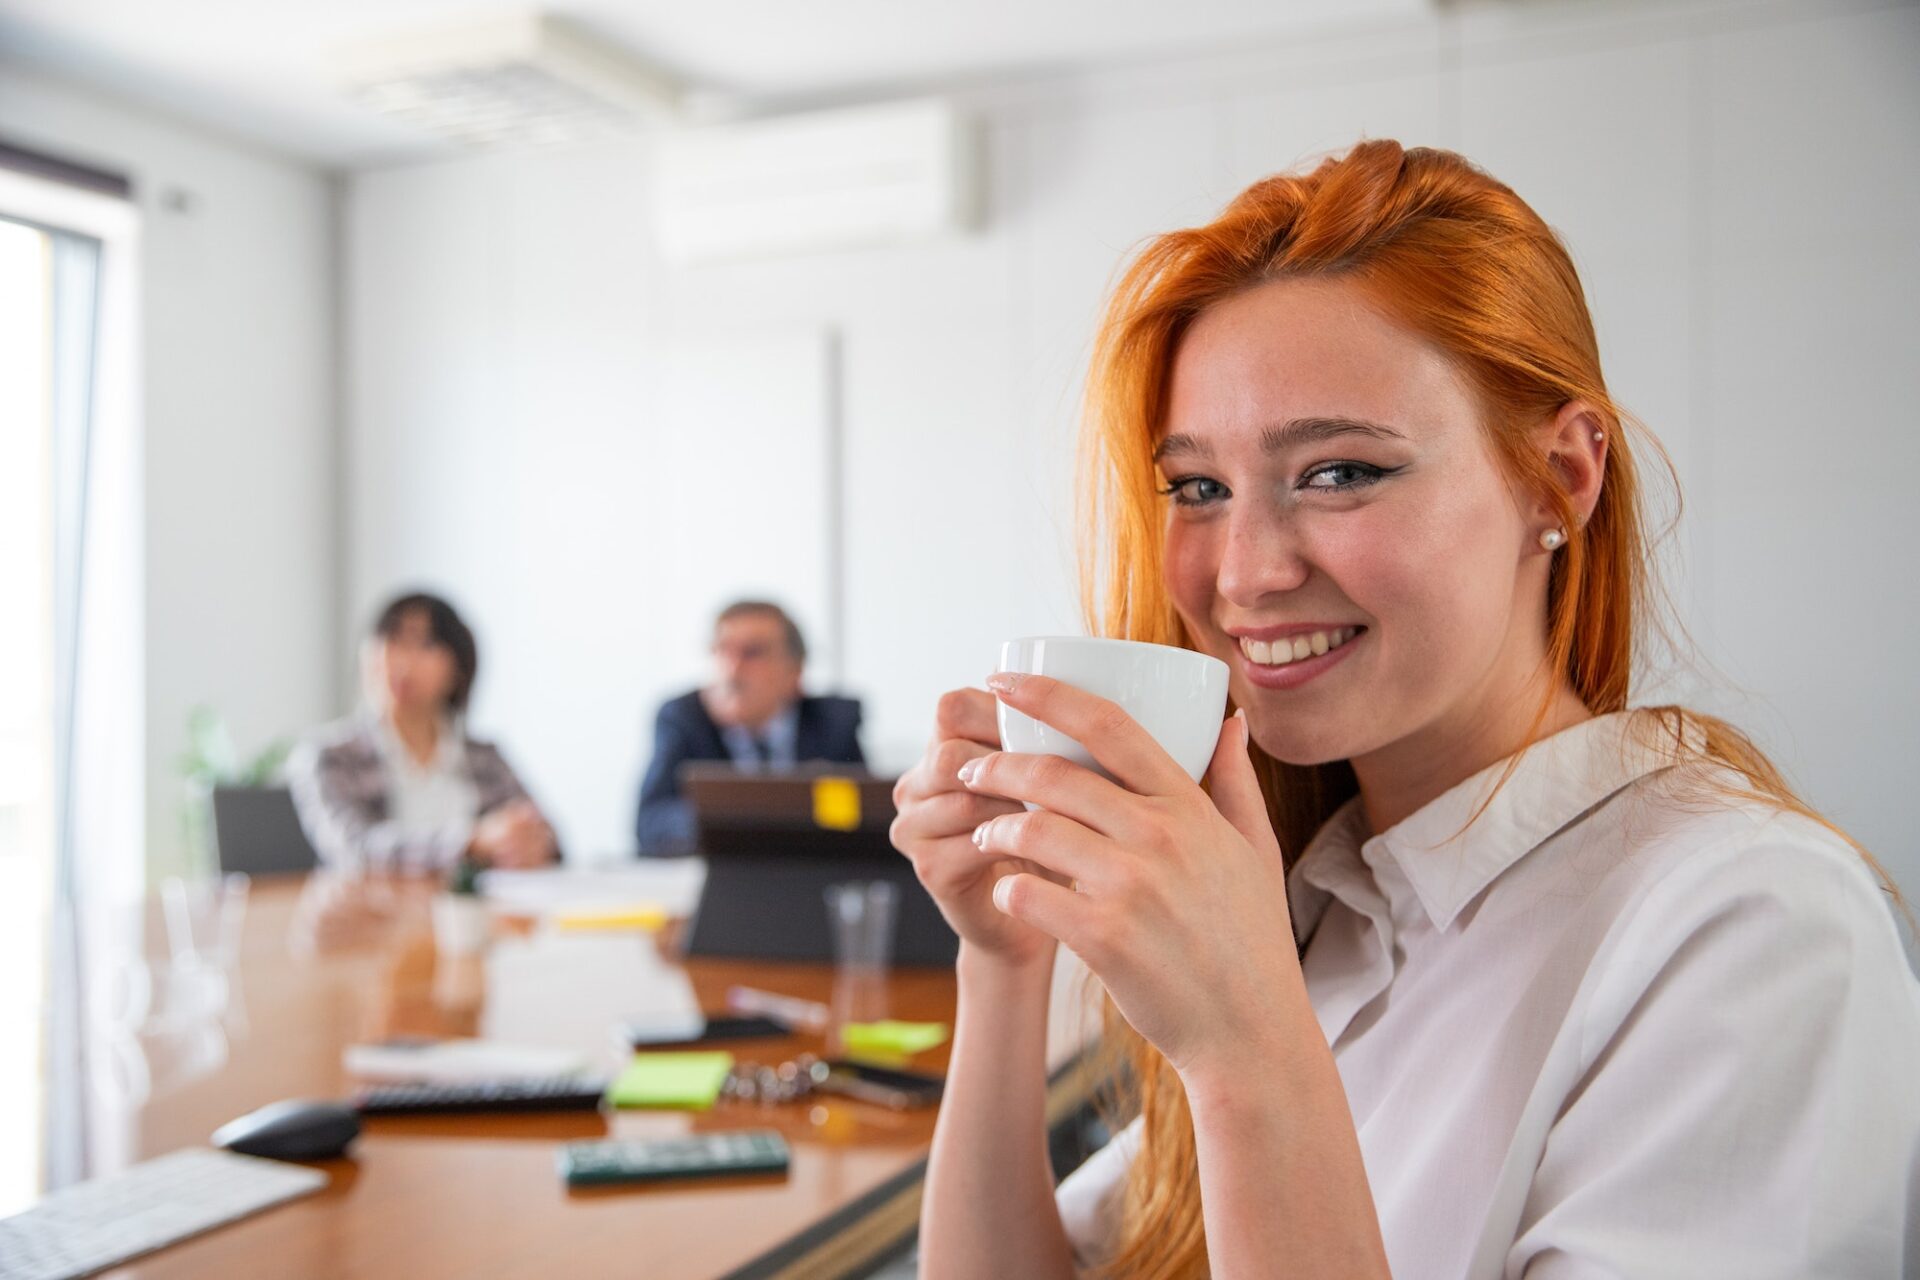 A businesswoman relaxes in the office drinking coffee, wellbeing at work concept